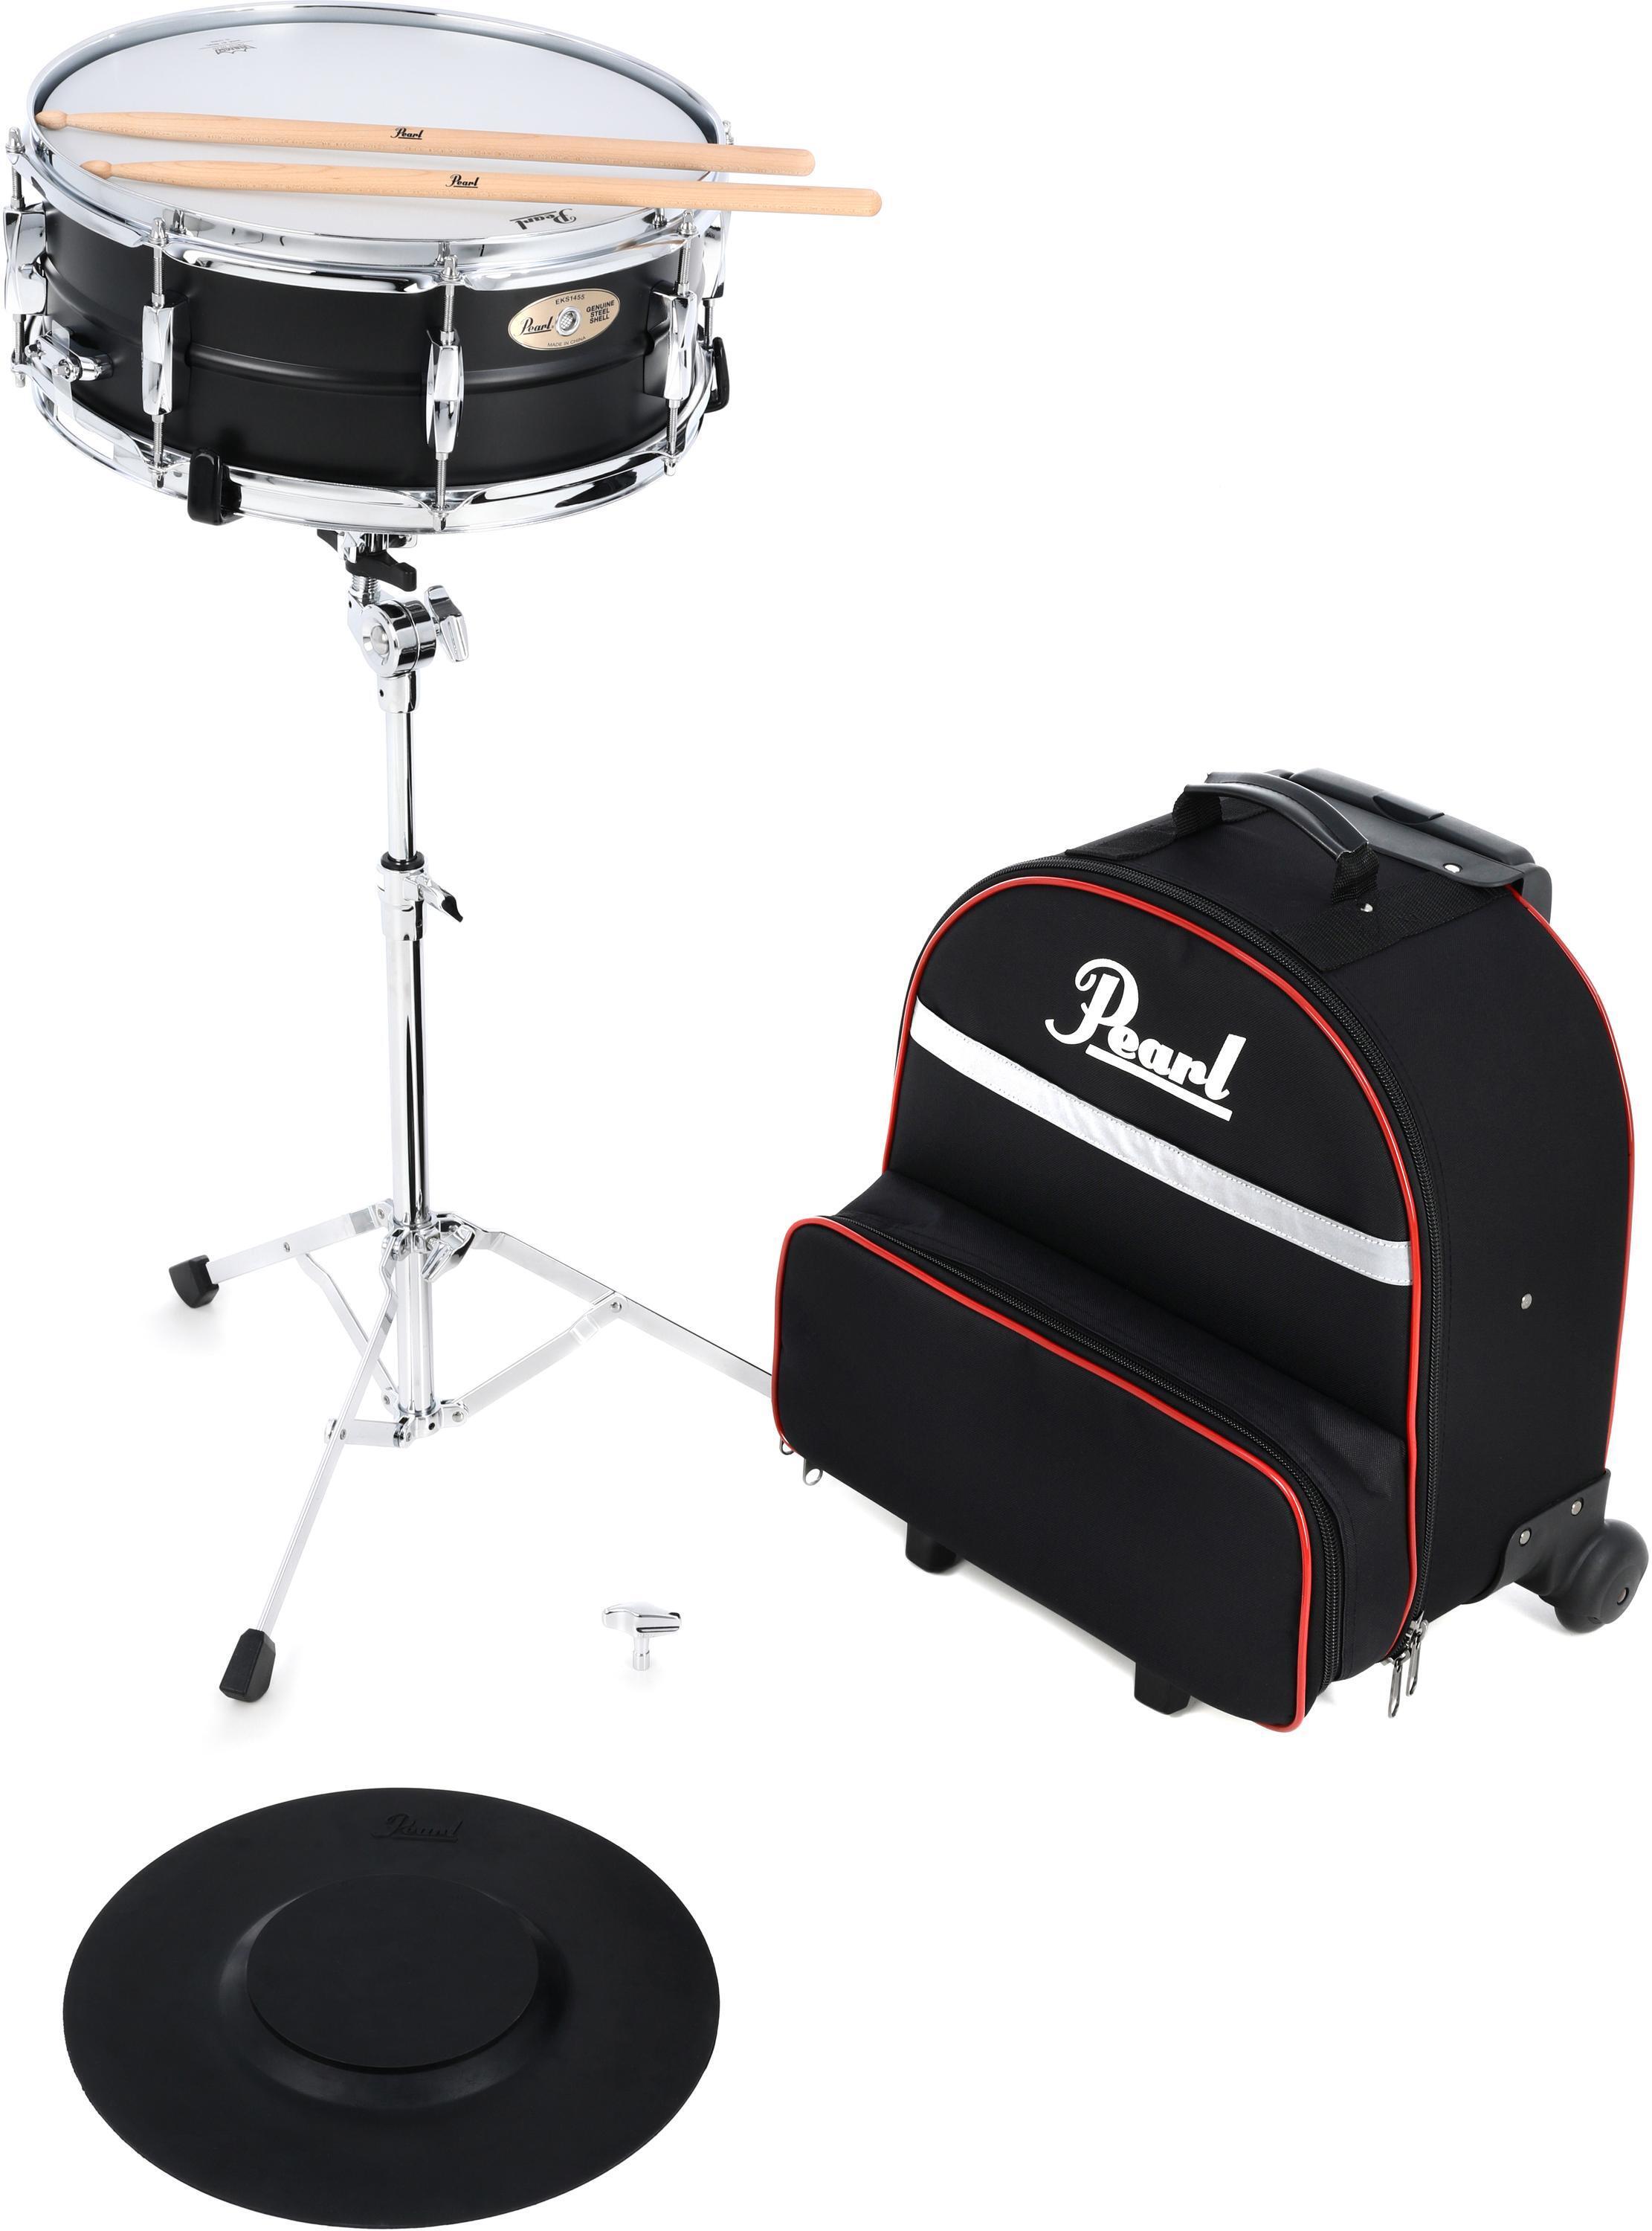 Xylophone Covers / Bags  Pearl Drums -Official site